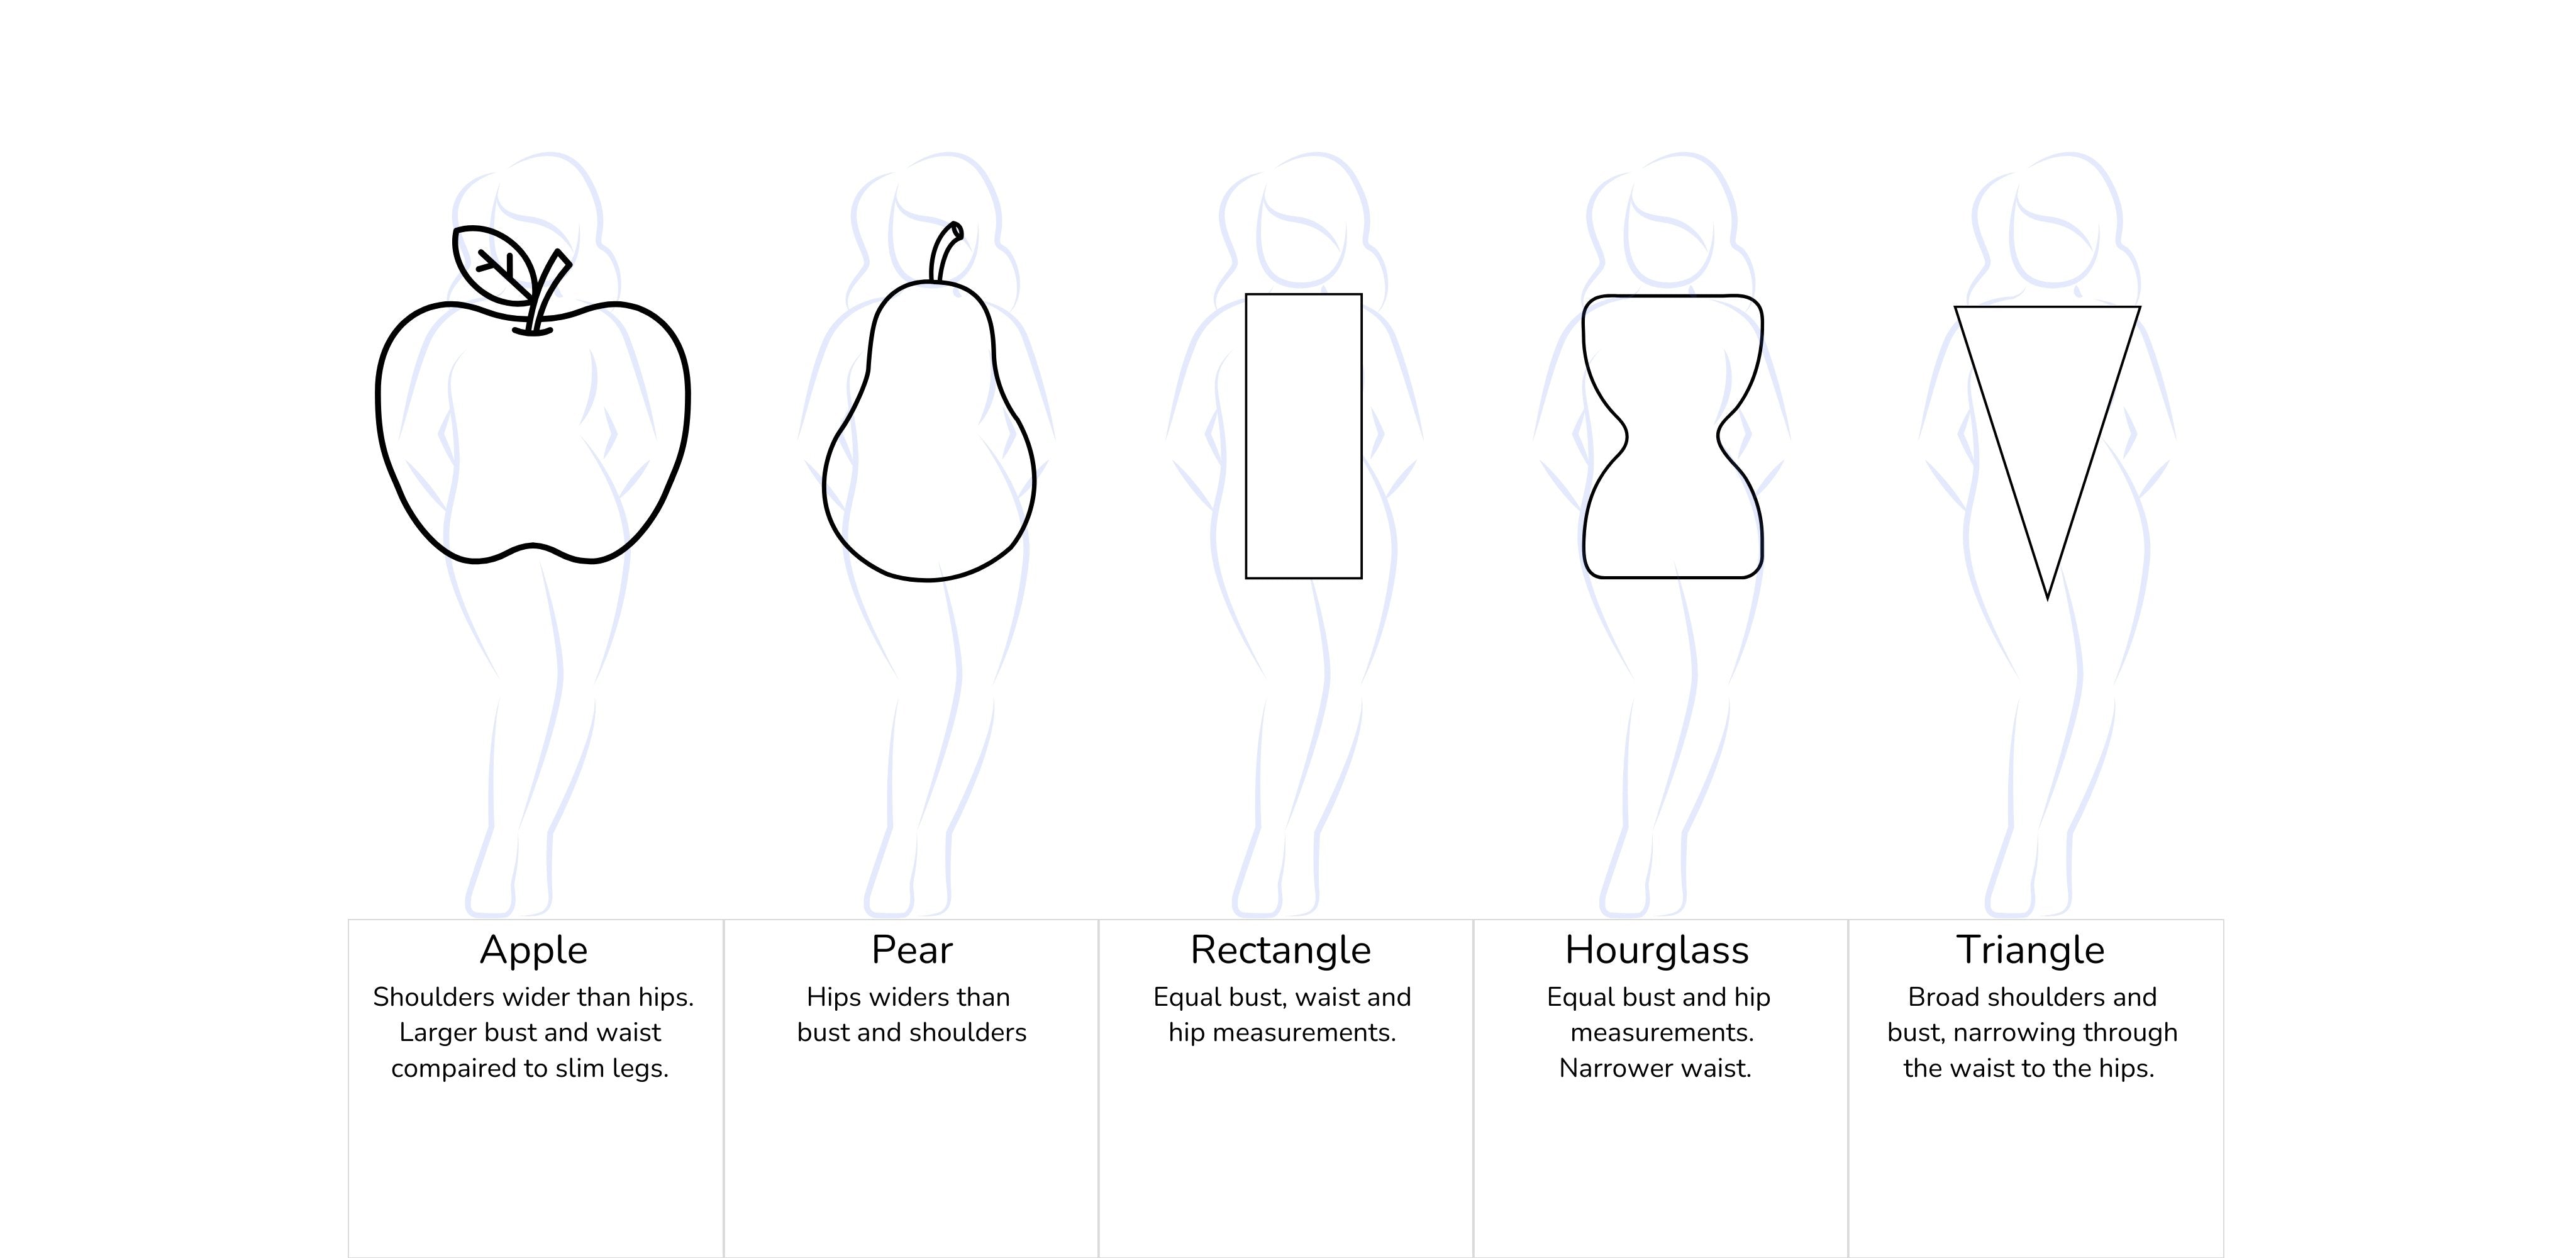 What Is Your Body Shape?